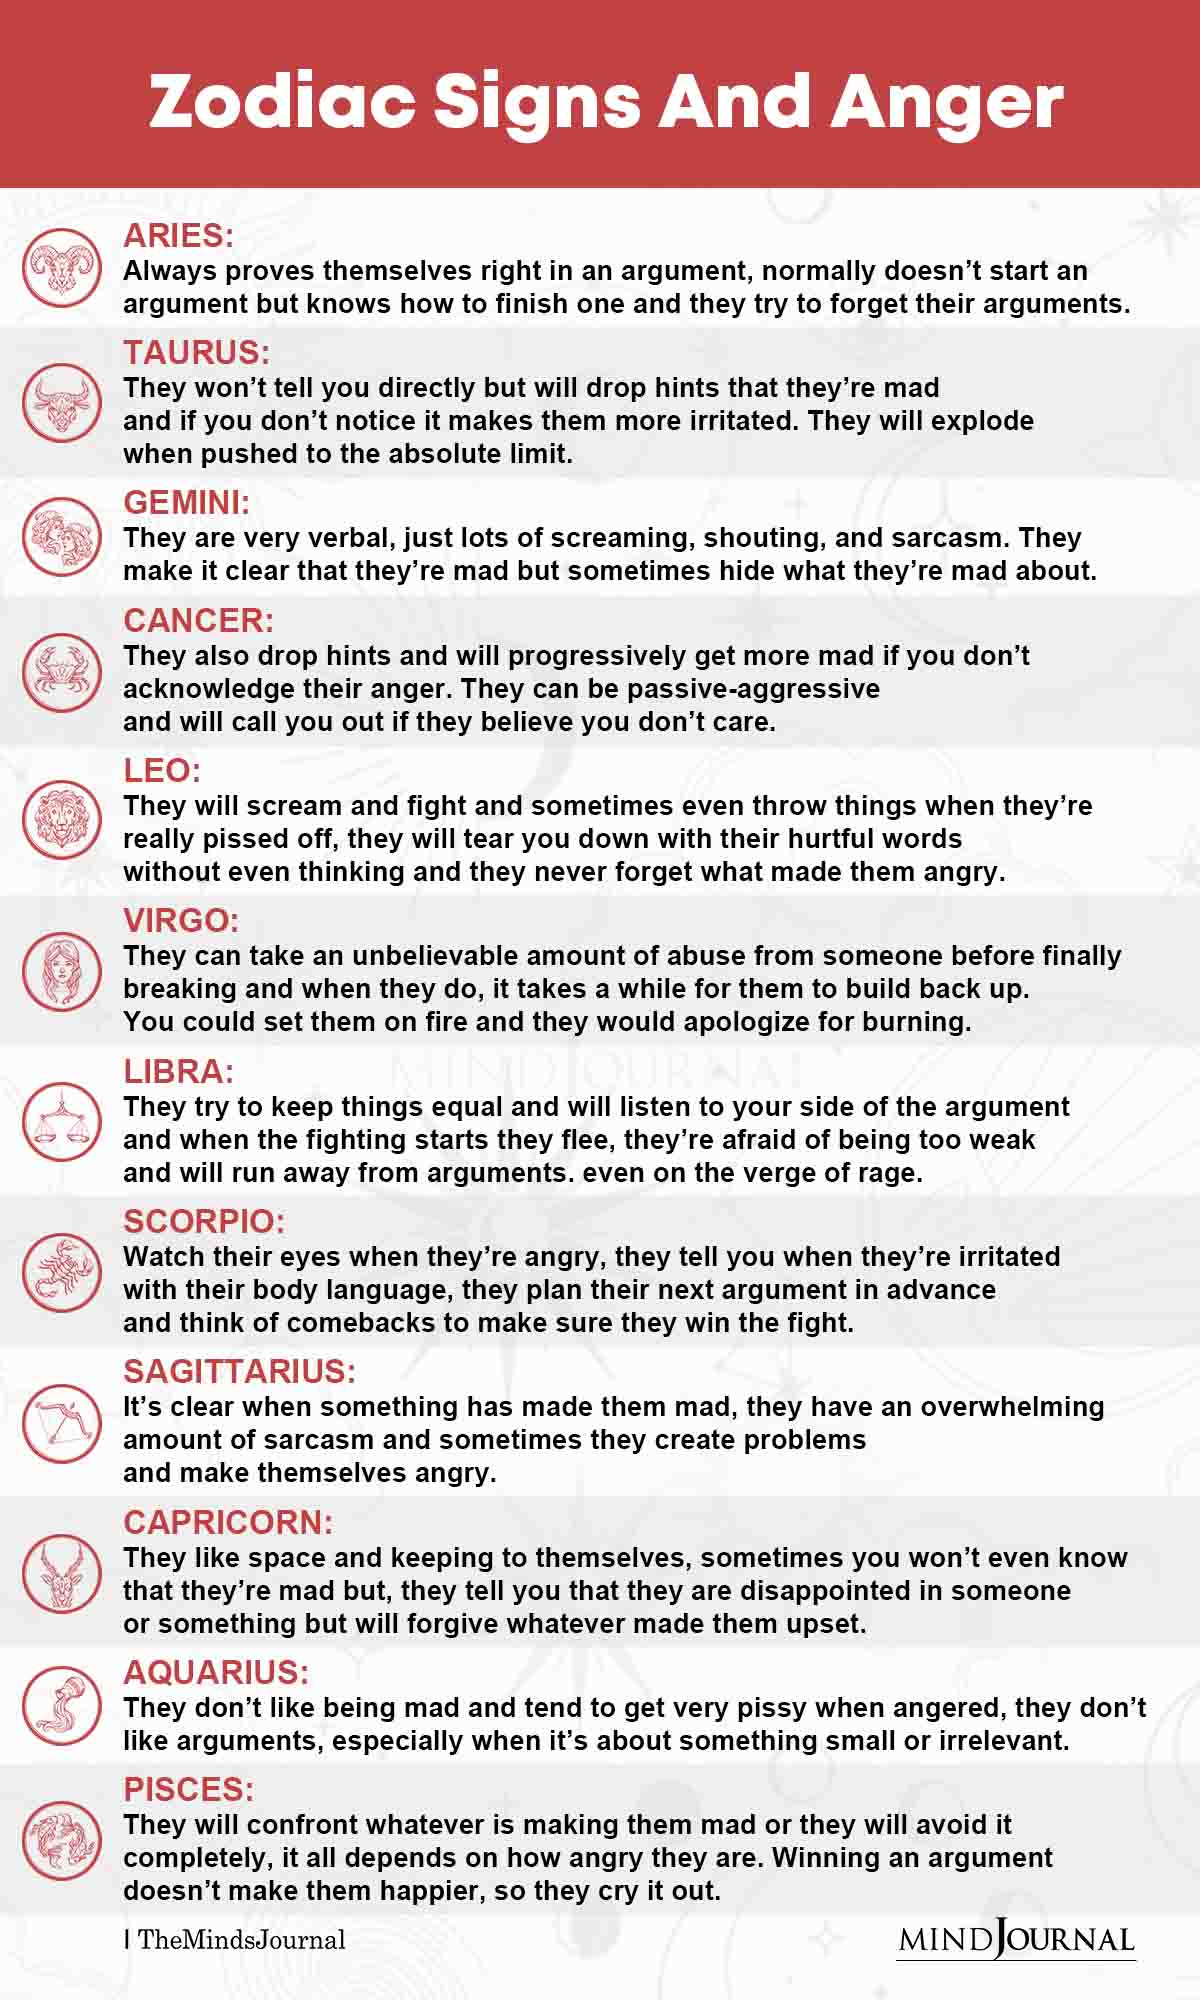 The Zodiac Signs and Anger